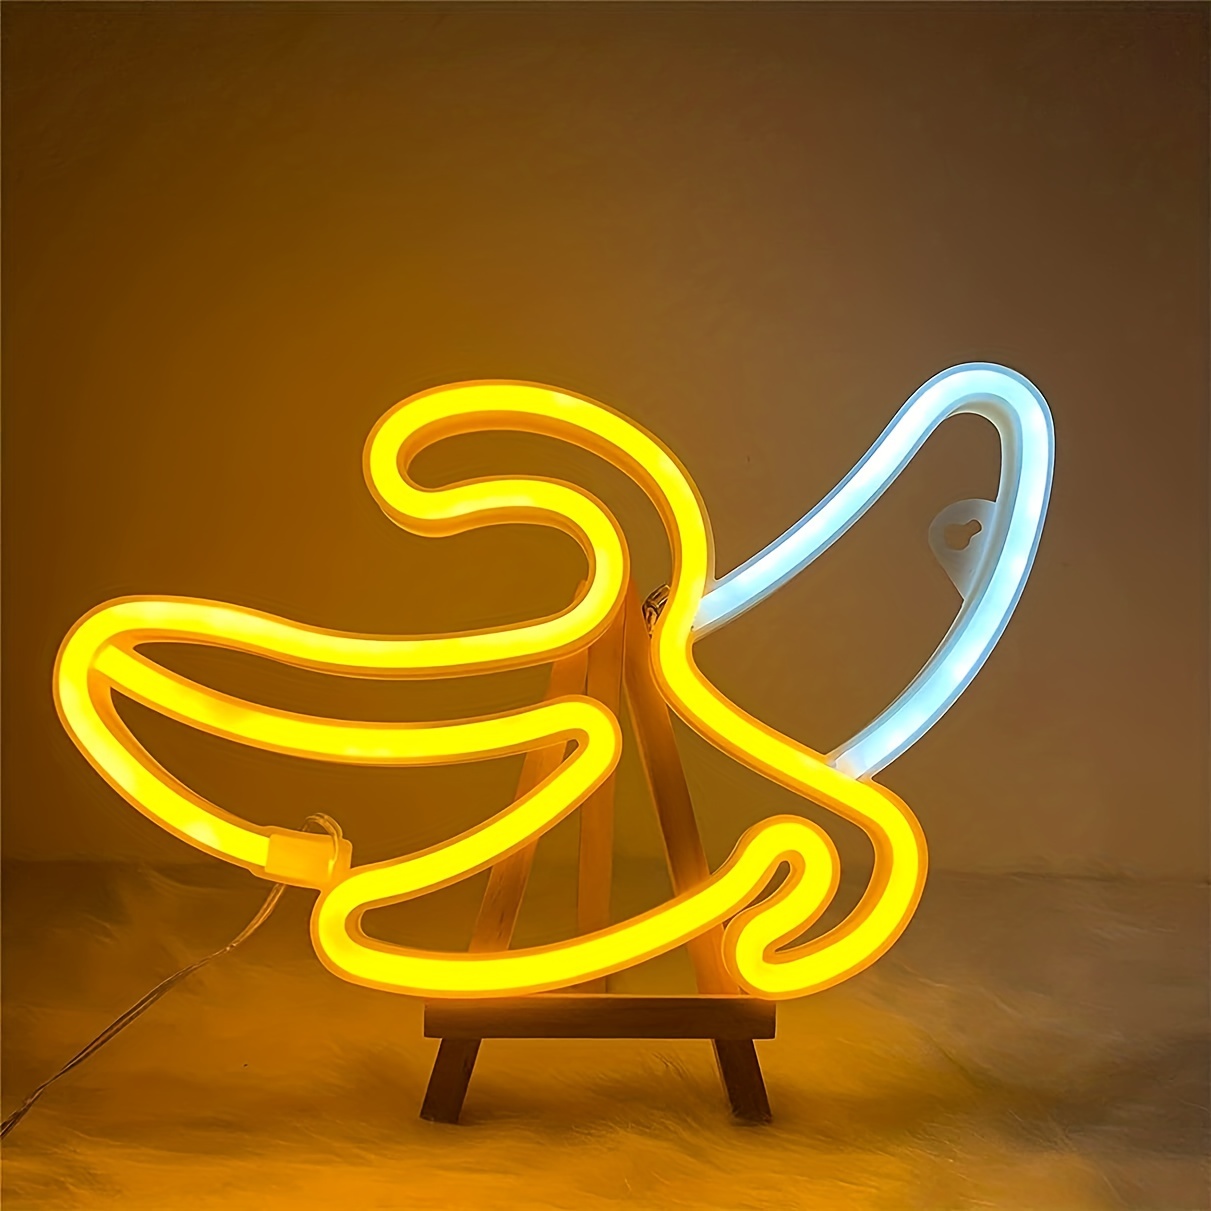 

1pc Banana Neon Sign, Usb & Batteries Powered Led Neon Light, Decorative Night Lights For Bedroom Wedding Birthday Party Game Room Home Wall Decor 11.4*7.9''